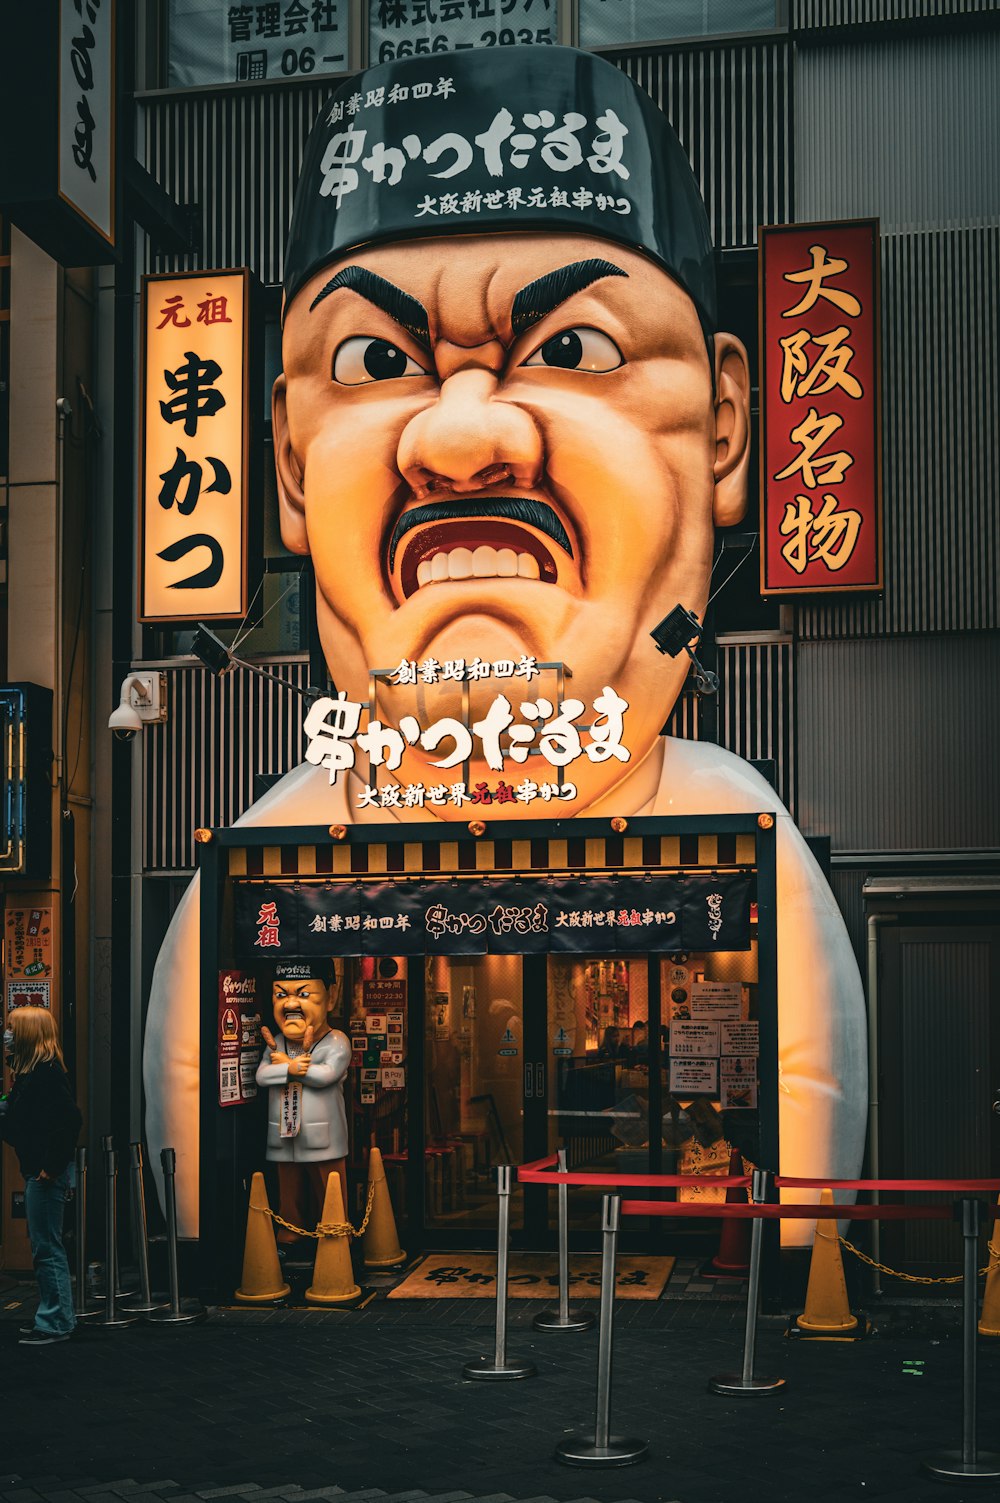 a giant statue of a man with his mouth open